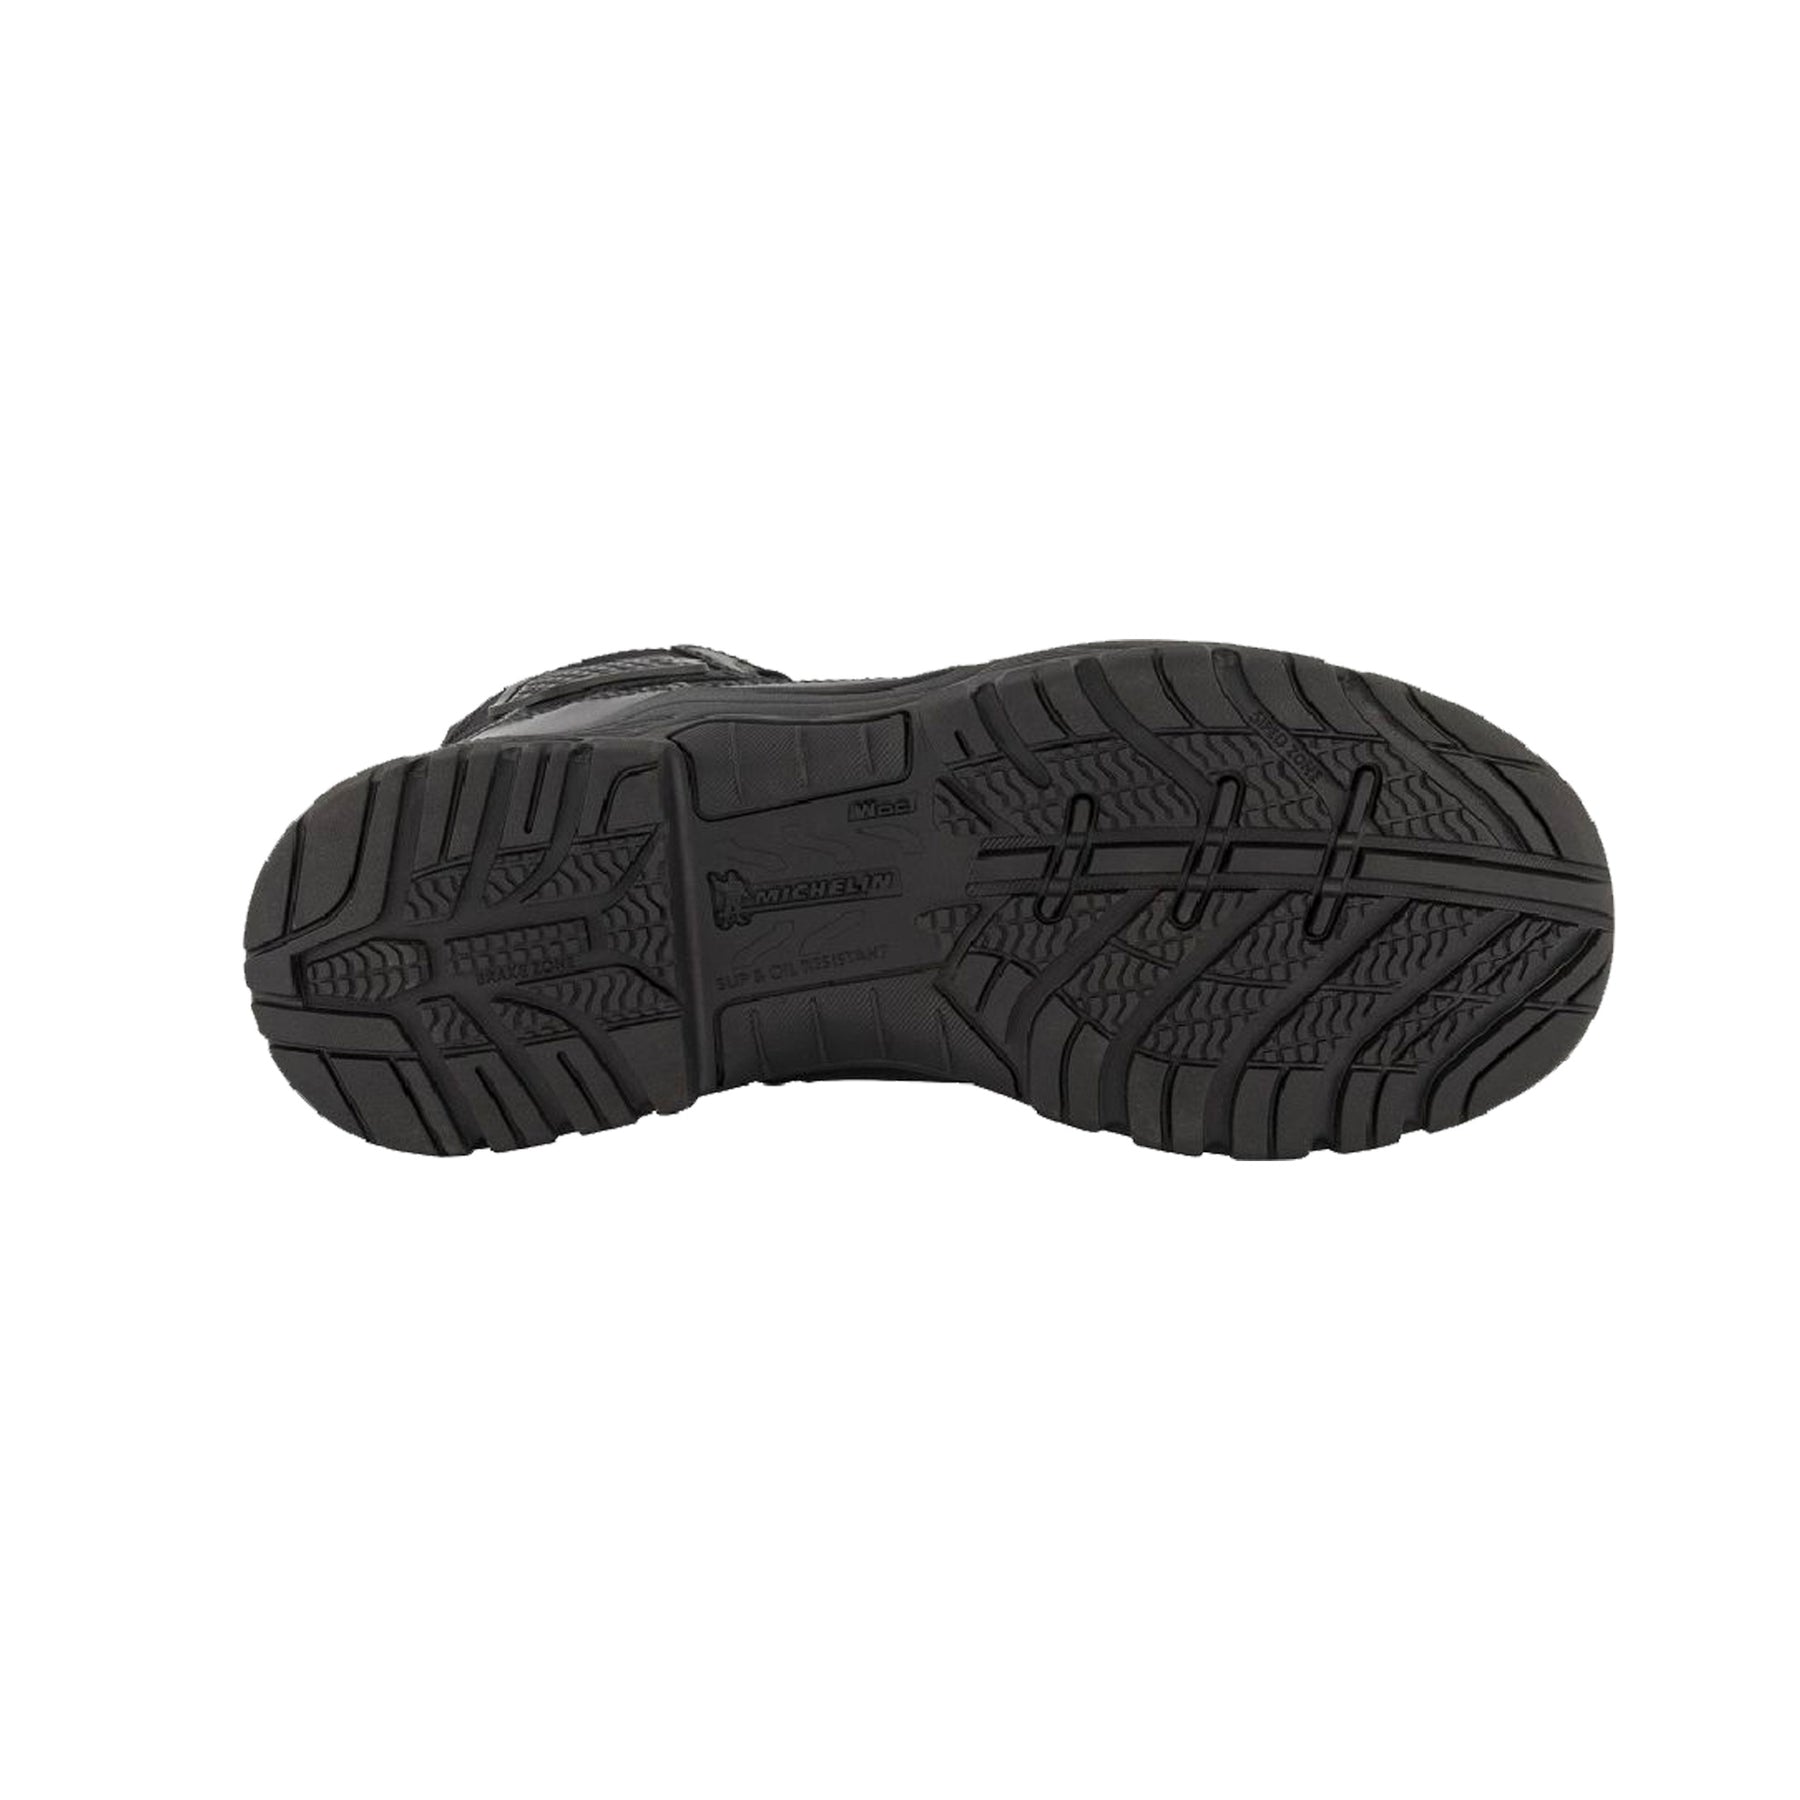 magnum boots strike force 8.0 side zip water proof